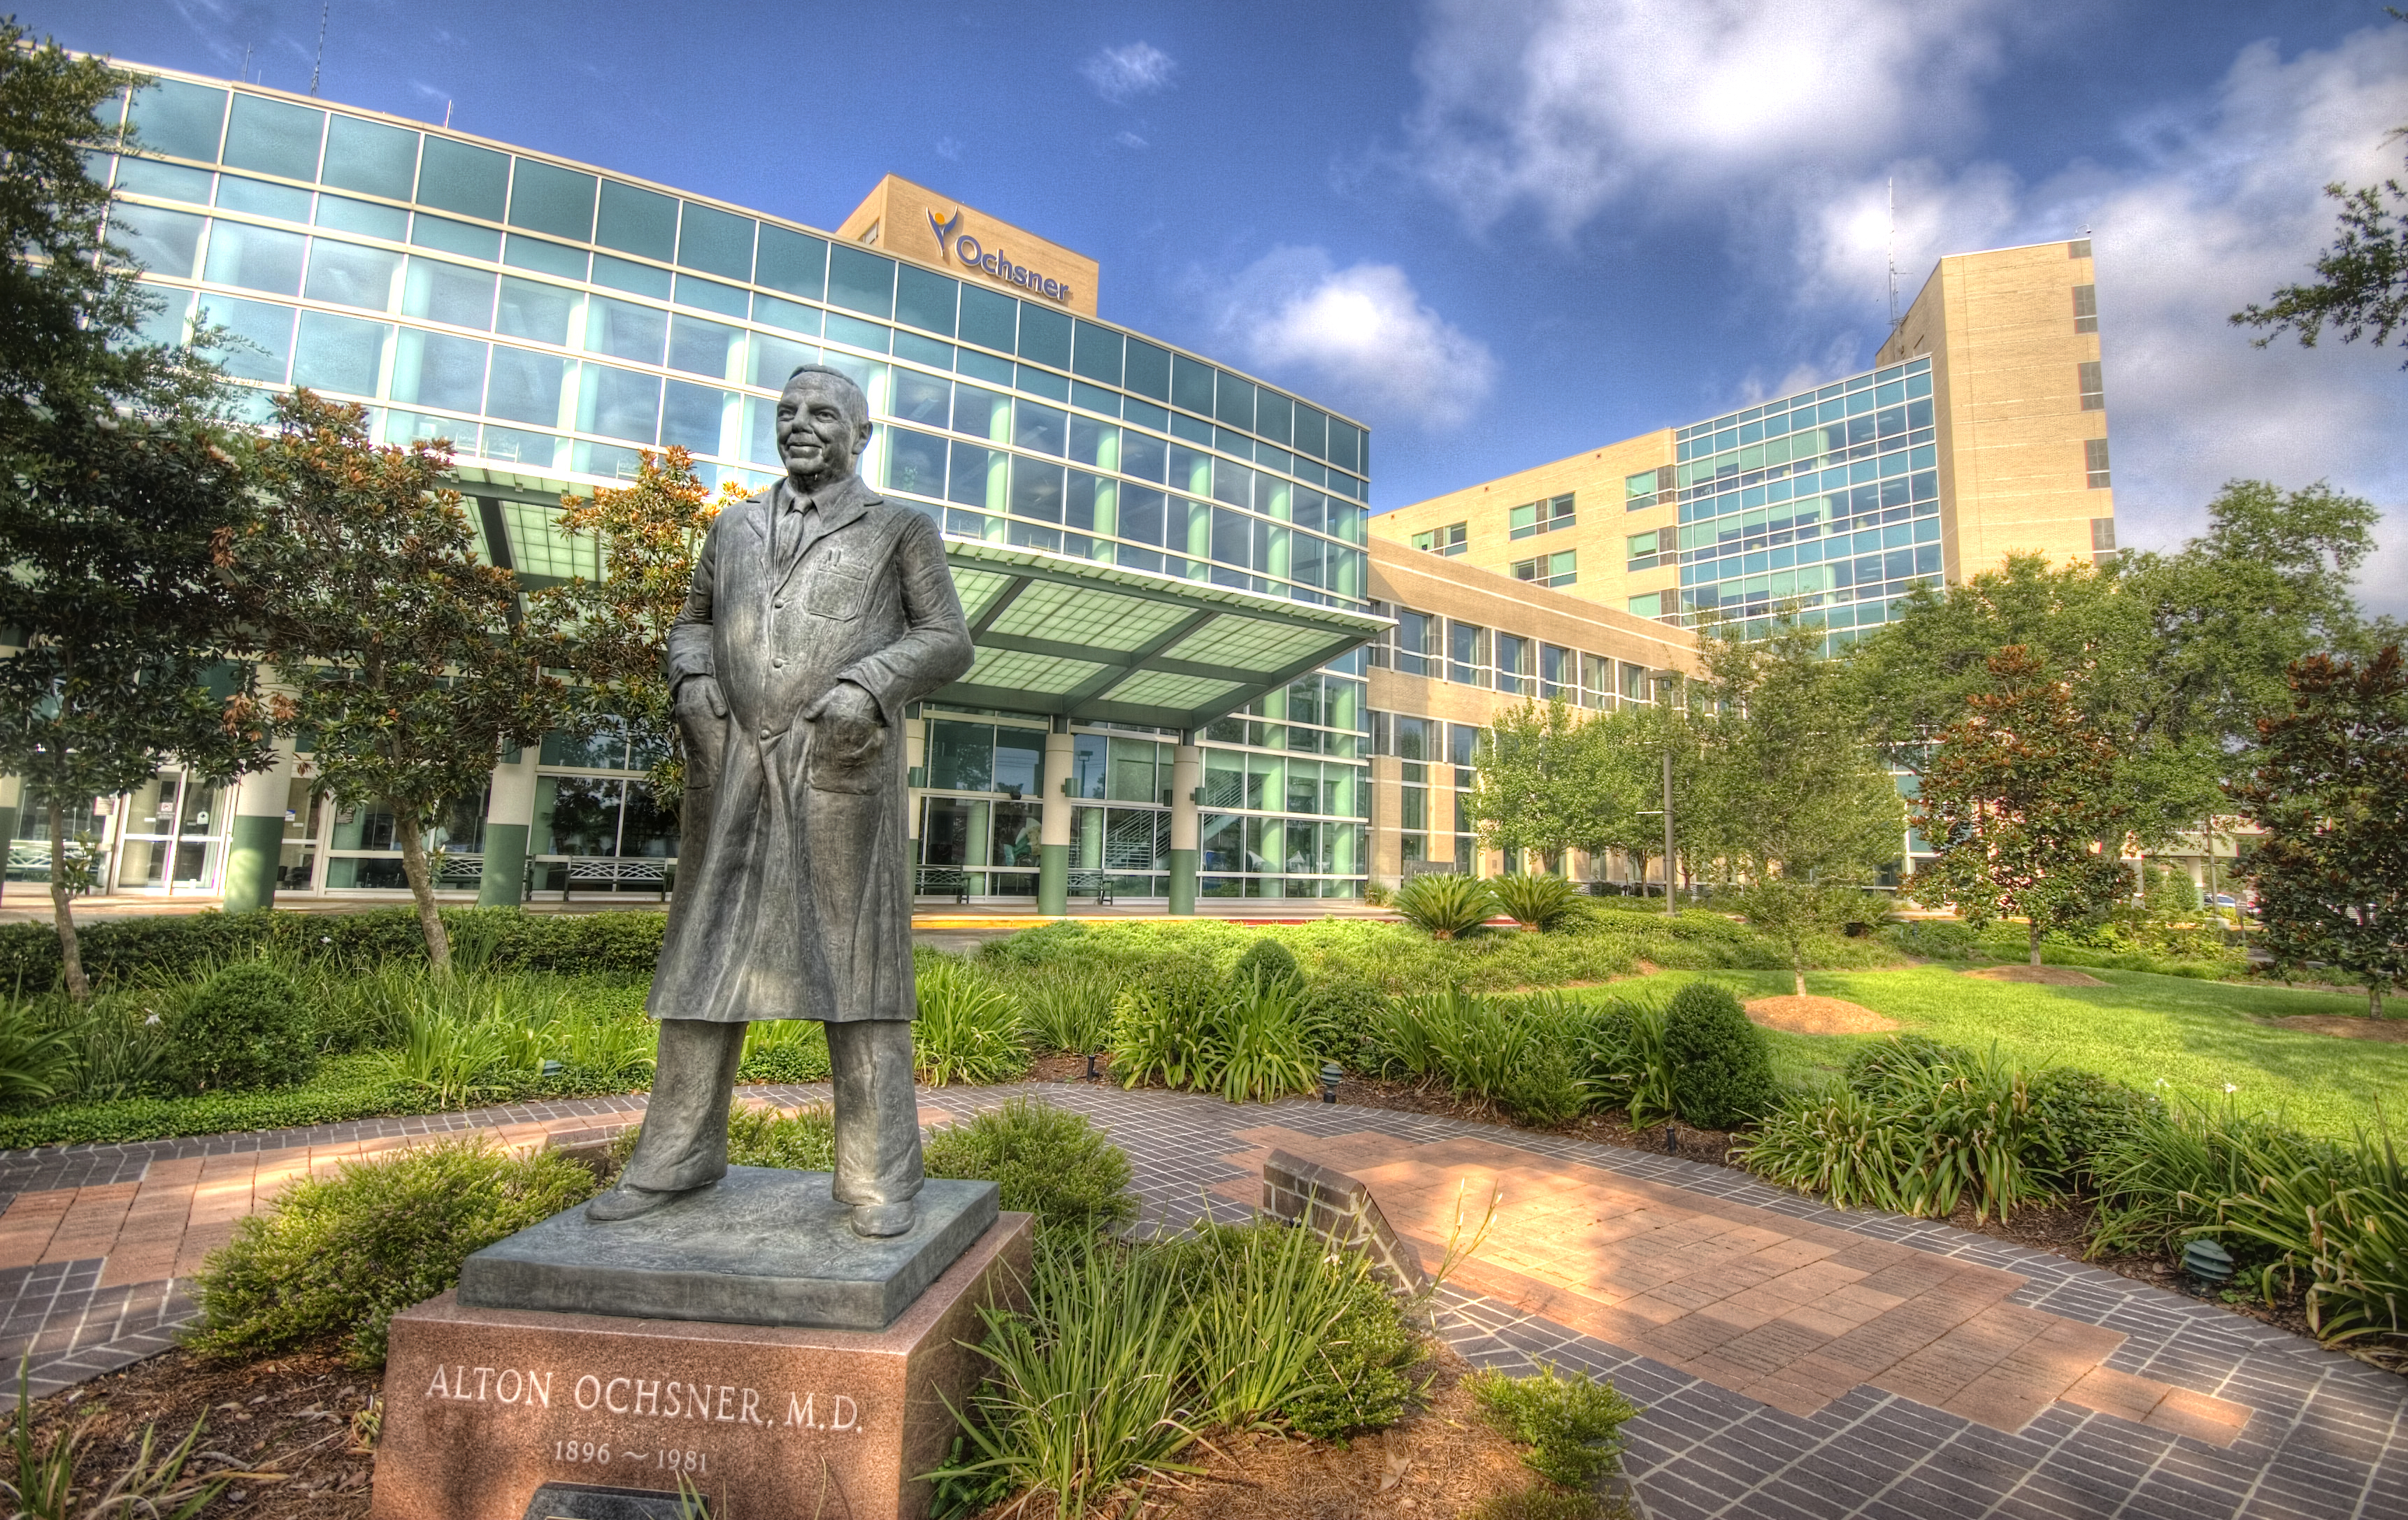 What is Ochsner Medical Center known for?